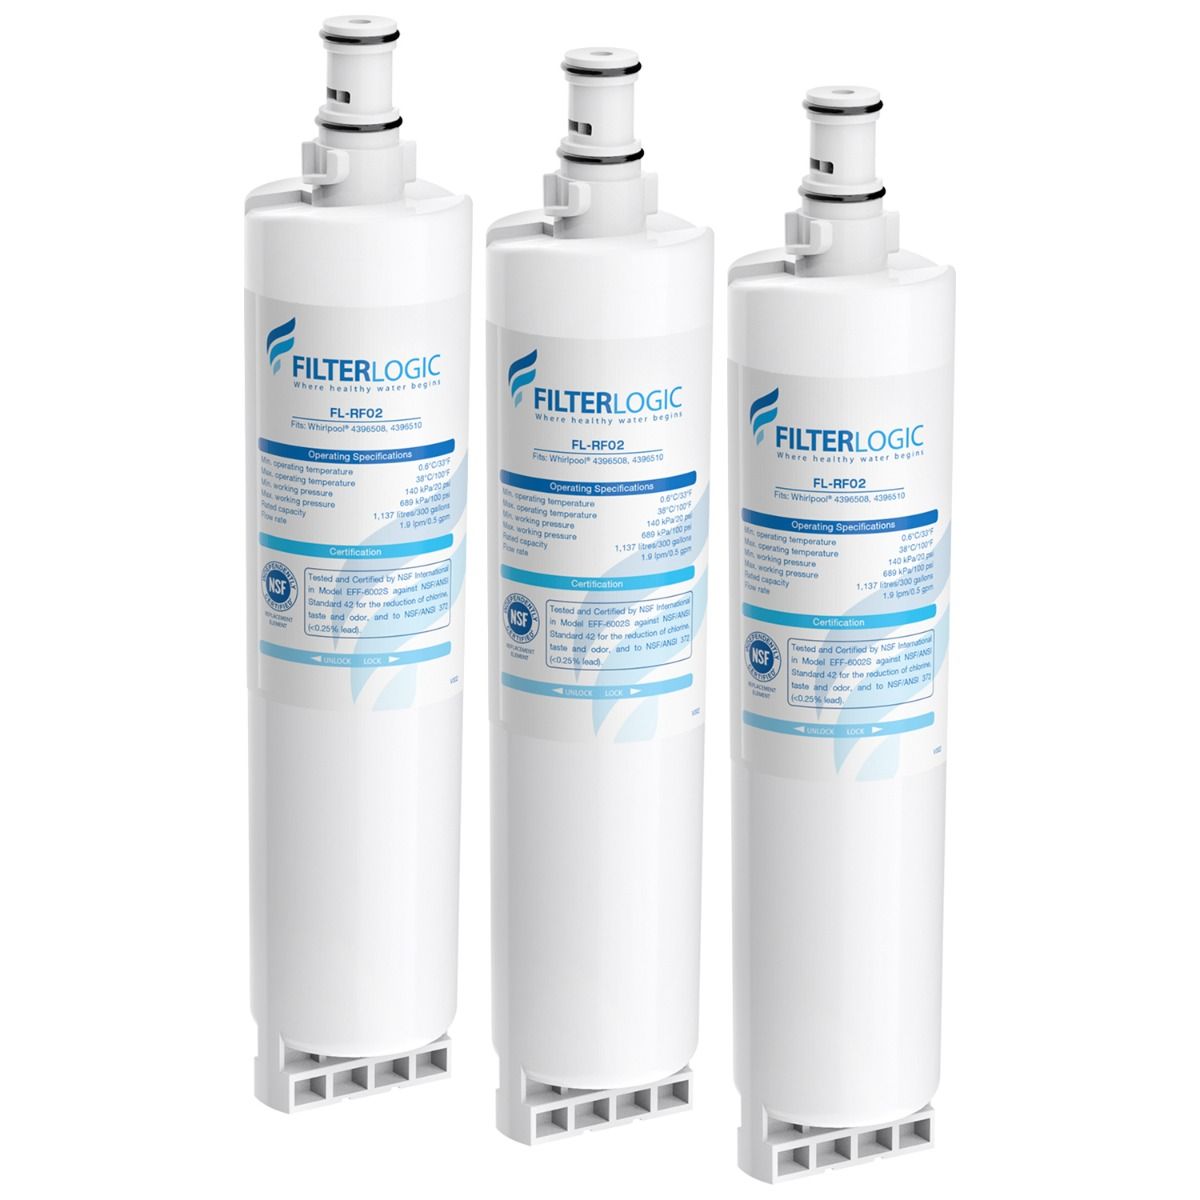 FilterLogic Replacement for Whirlpool 4396508 Refrigerator Filter